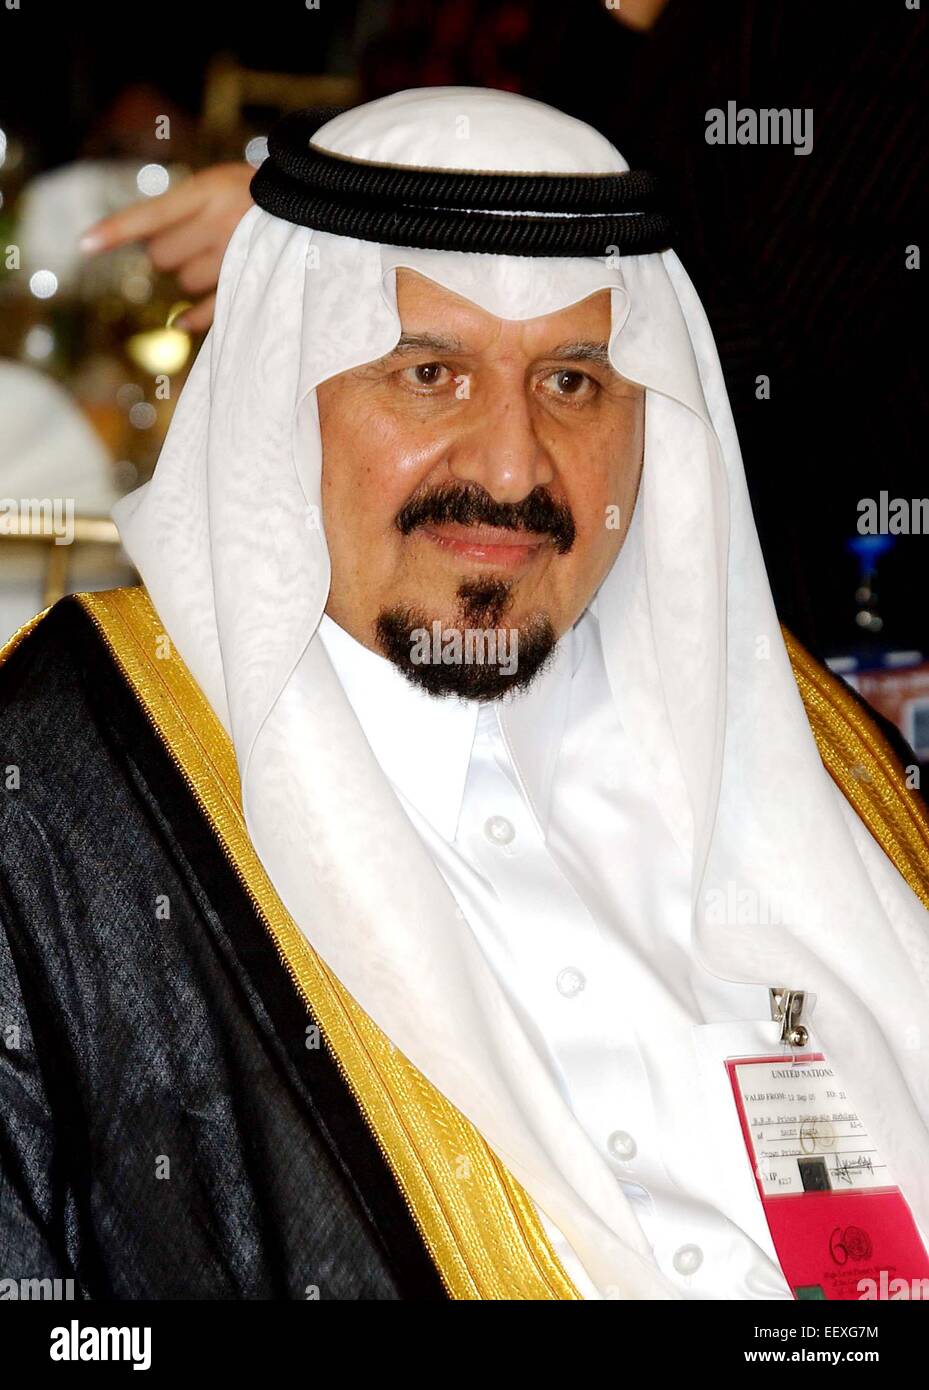 File images from 2005. . Saudi Arabia's King ABDULLAH BIN ABDULAZIZ AL SAUD has died at age 90, state television announced. He had been in the hospital for several weeks suffering from a lung infection. Abdullah, a U.S. ally in the fight against al-Qaeda, came to power in 2005 after his half-brother died. PICTURED - Sept. 14, 2005 - New York - King Abdullah Bin Abdul Aziz Al Saud of Saudi Arabia atHigh-Level Plenary Meeting Of The General Assembly at the United Nations. Credit:  Globe Photos/ZUMAPRESS.com/Alamy Live News Stock Photo